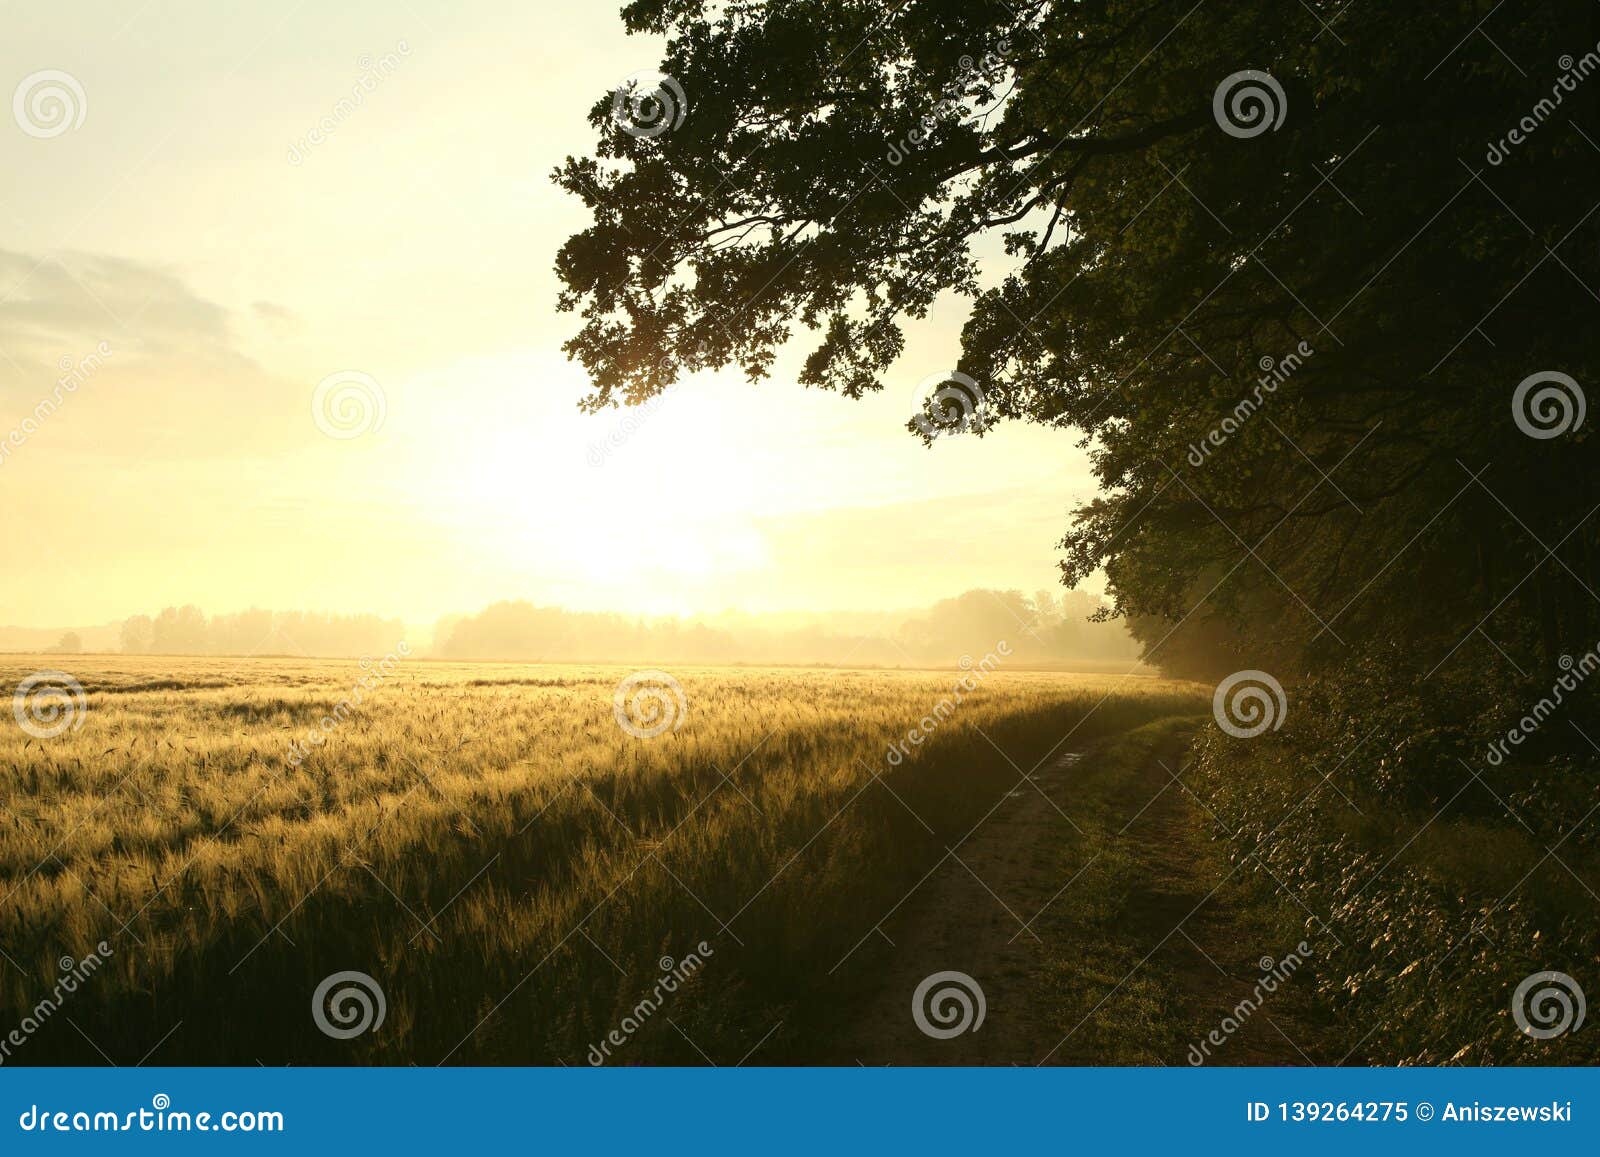 Sunrise Over A Field In Misty Spring Weather Silhouettes Of Trees At